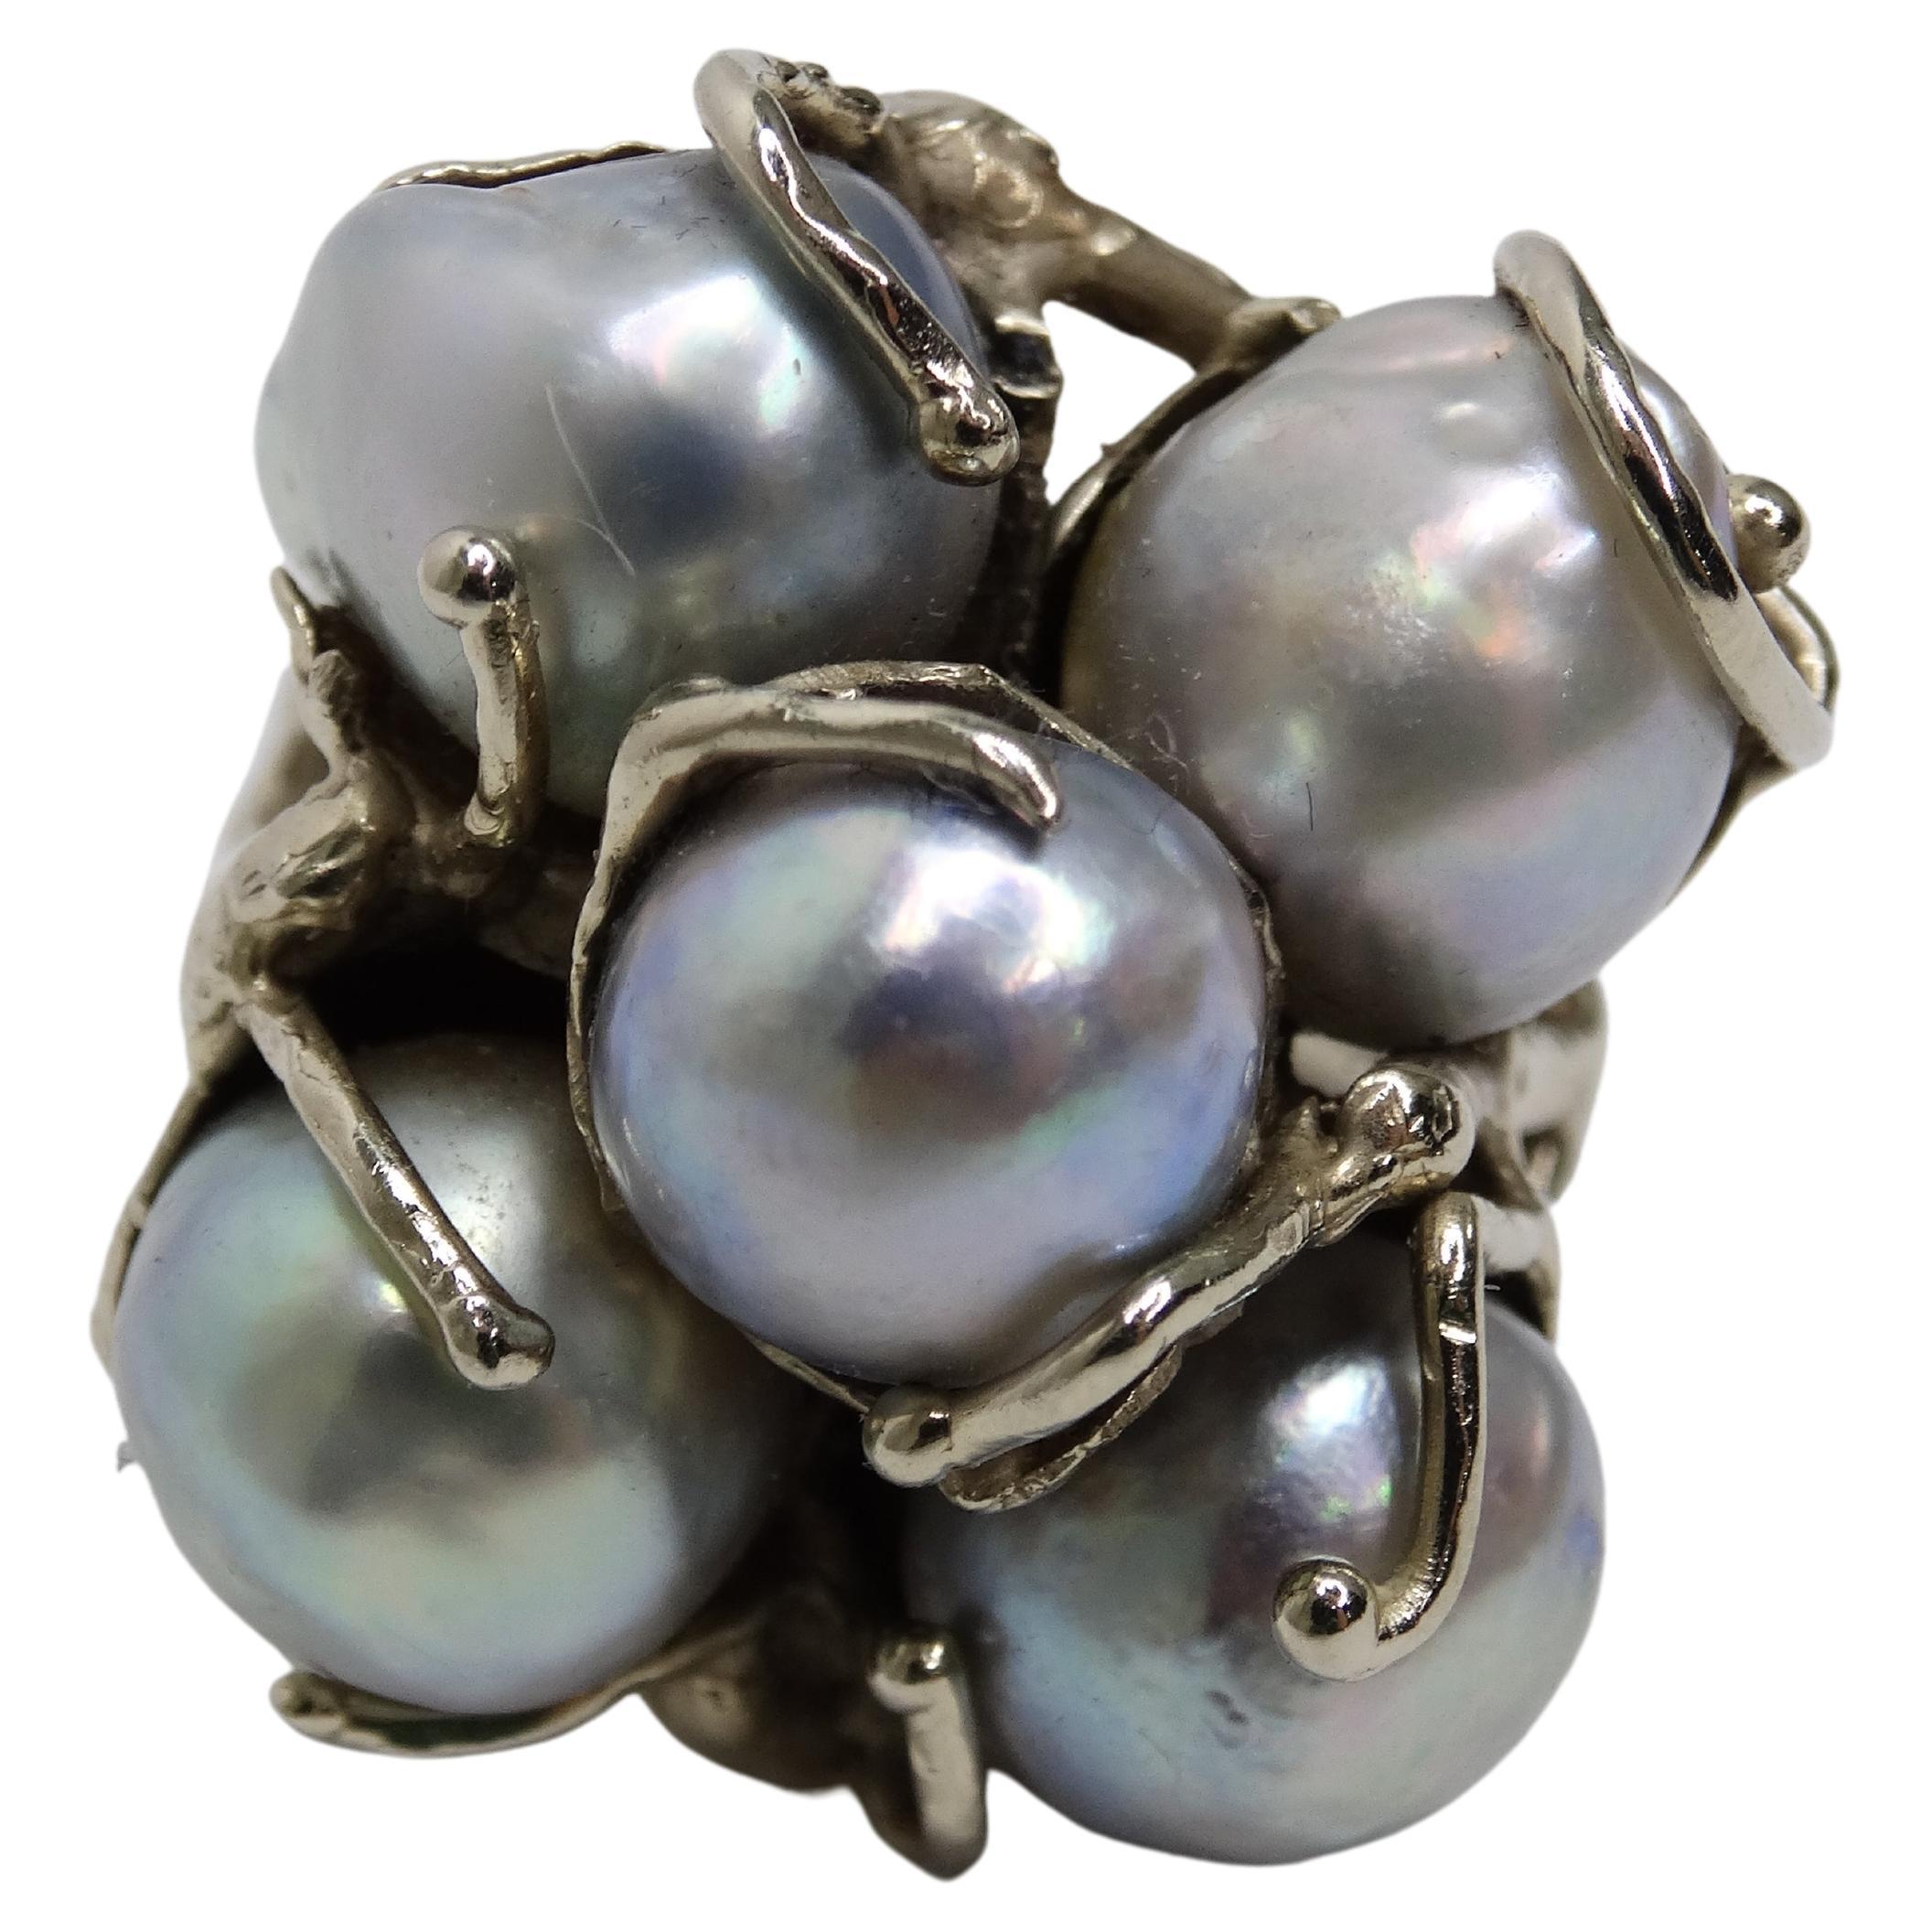 Decorate your hands with this beautifully made ring. Bring this 1970's ring back to life and add it to your jewelry collection. This cocktail ring is made to be shown off as it is large in size. This ring is made out of five large blue pearls that